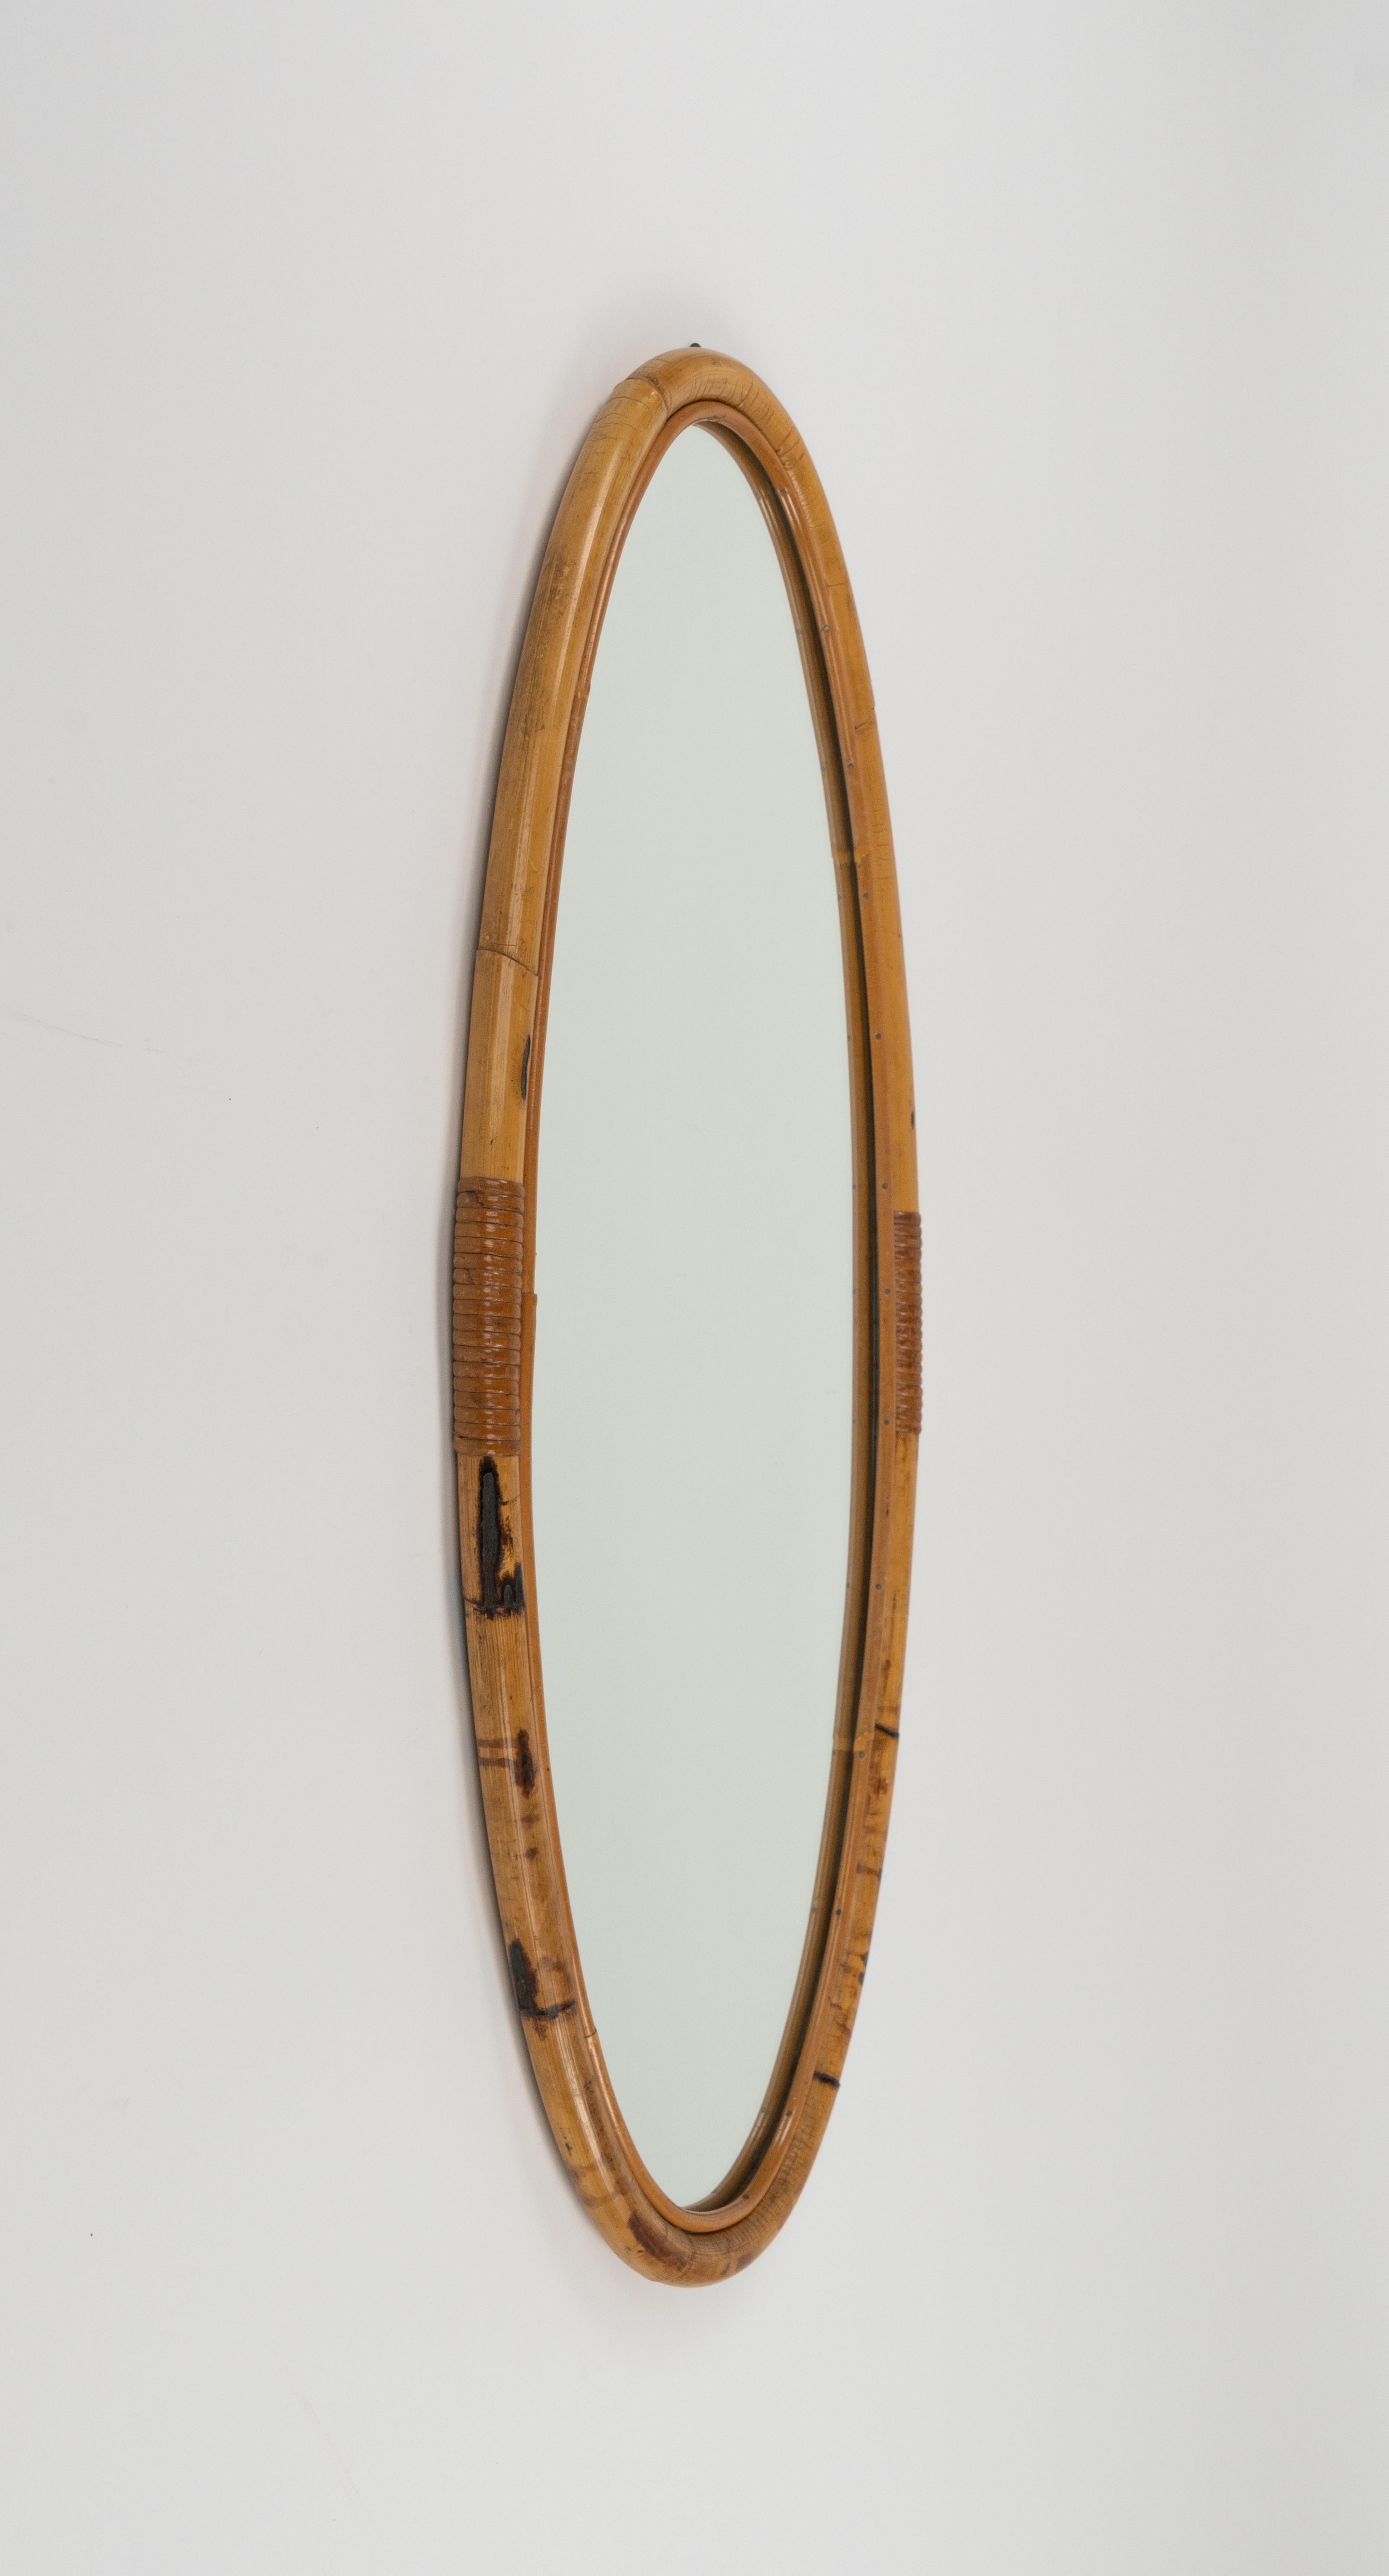 Midcentury Bamboo and Rattan Oval Wall Mirror, Italy 1970s For Sale 6